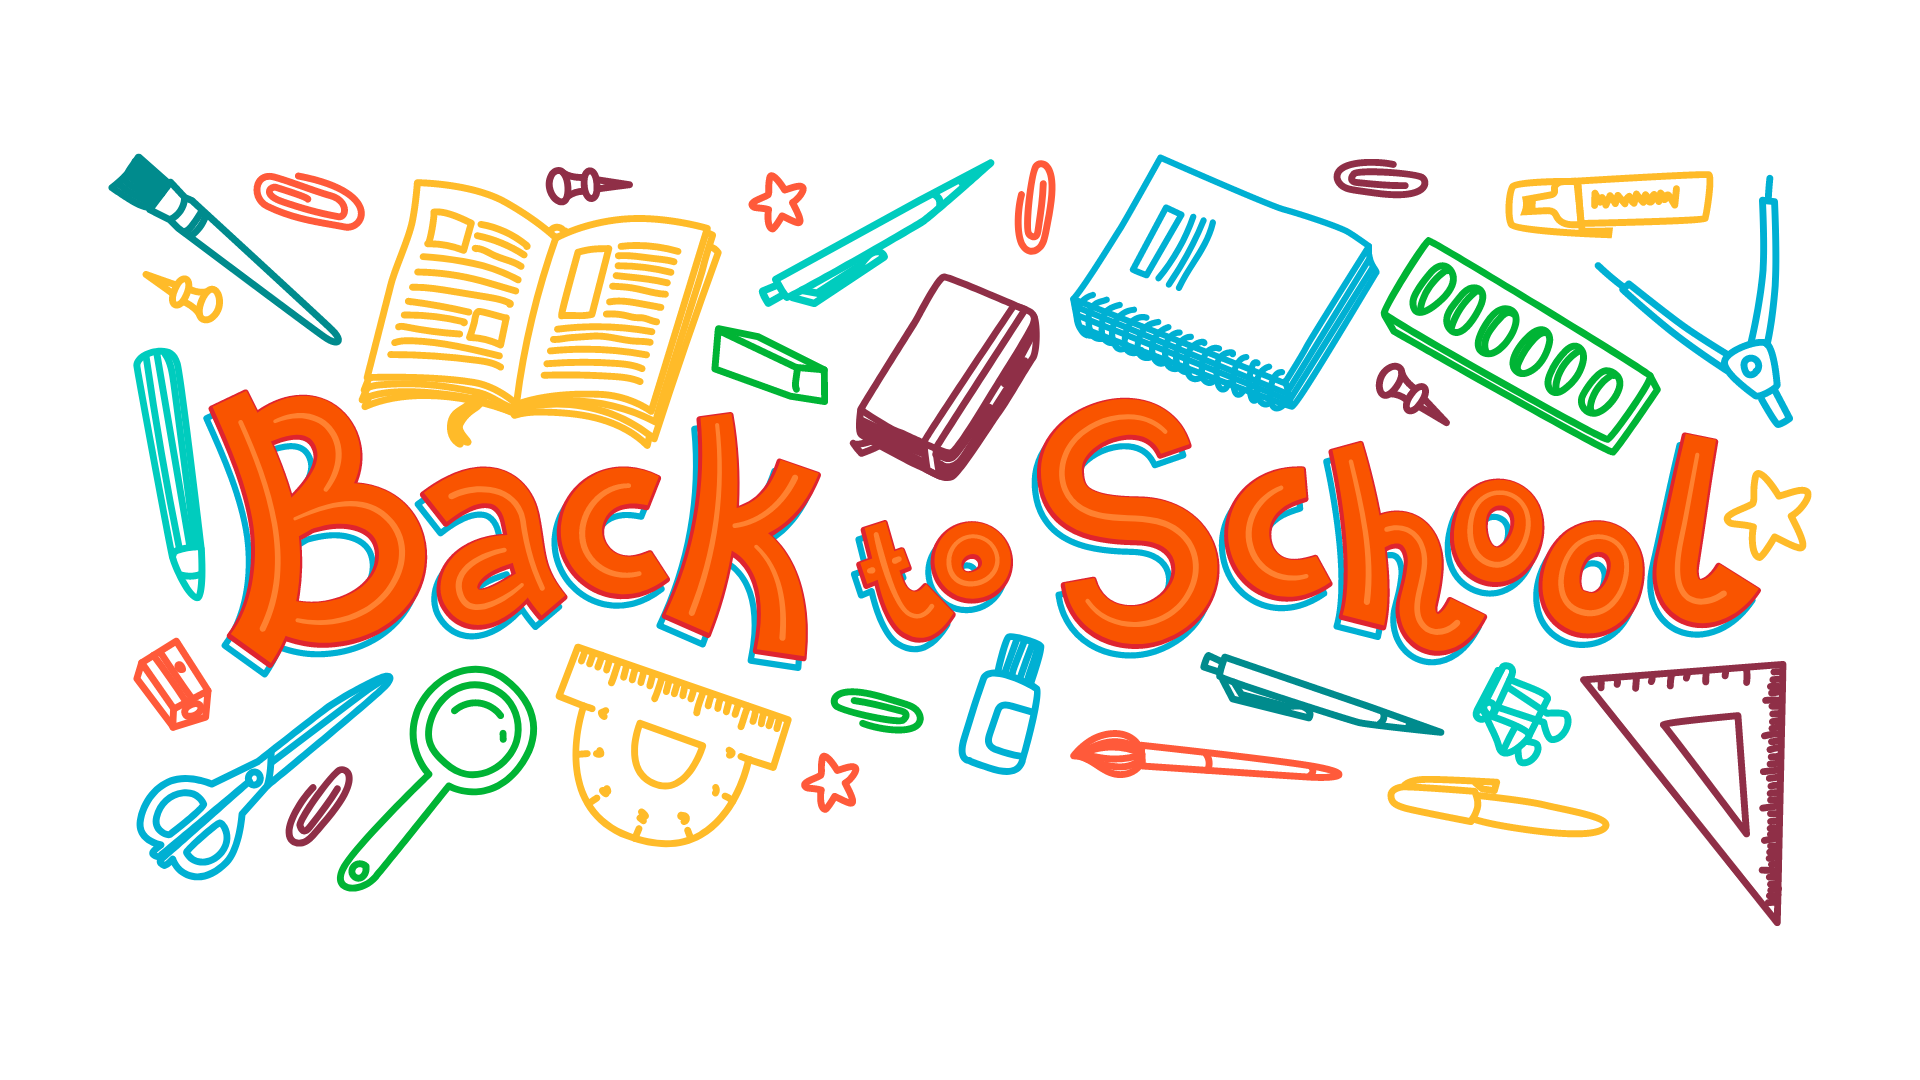 First Day of School – August 8th